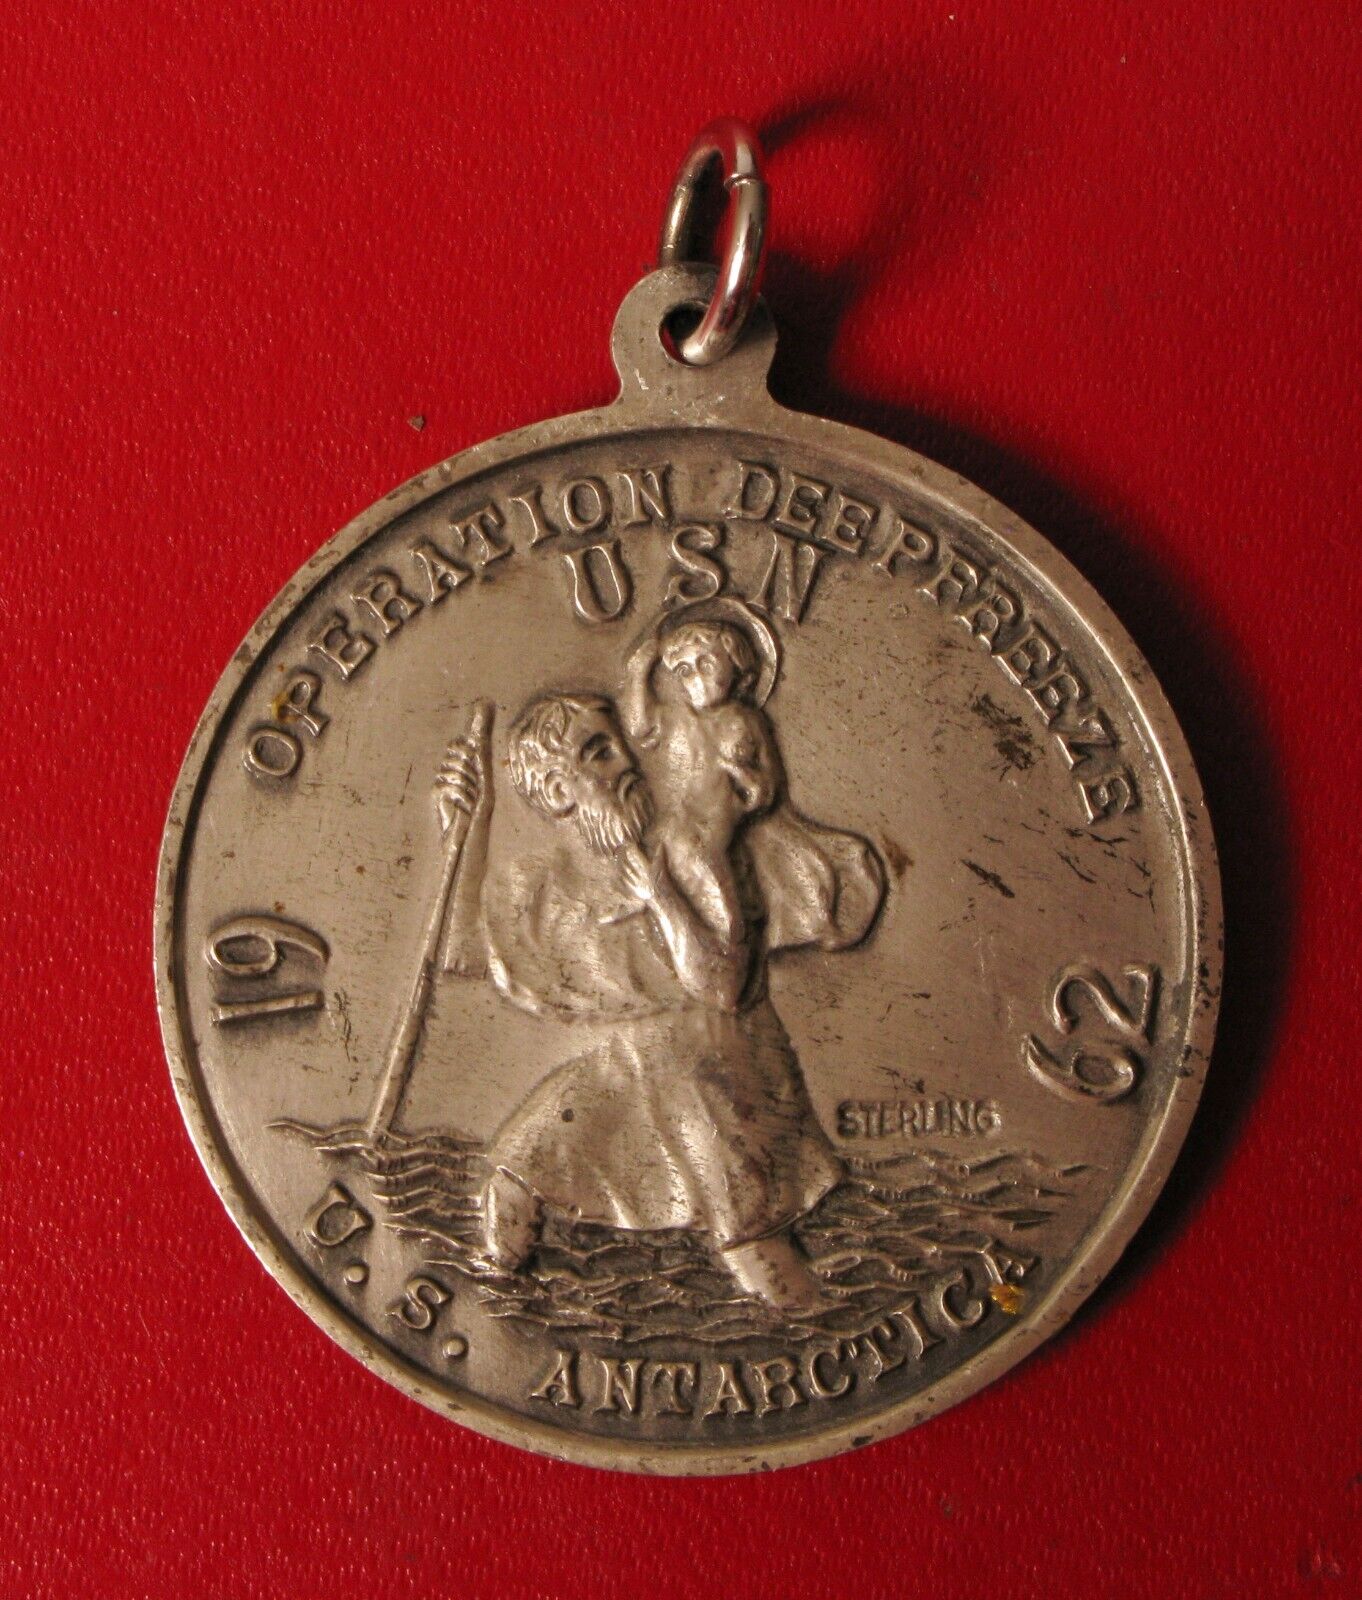 1962 USN ANTARTICA OPERATION DEEP FREEZE STERLING MEDAL OUR LADY OF THE SNOWS  